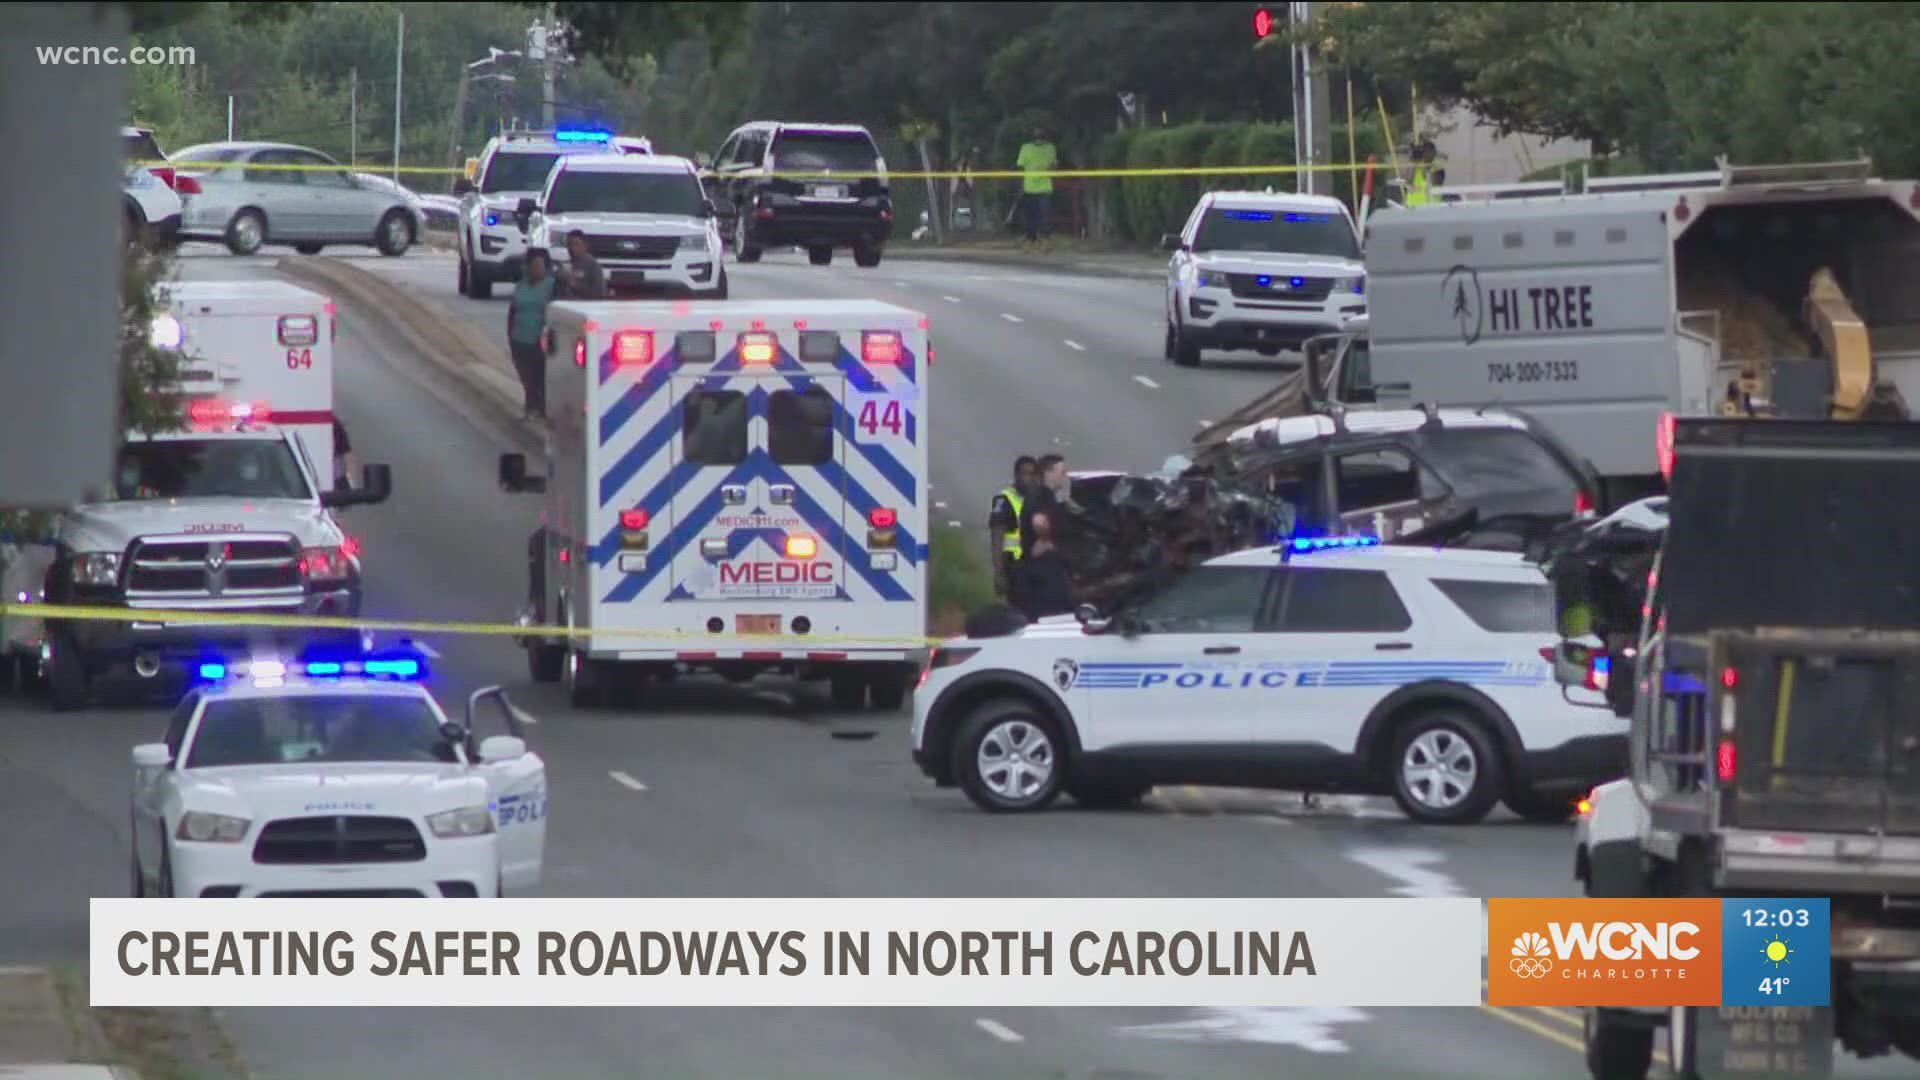 Over 1,700 people were killed on North Carolina roads last year. Experts say speeding and distracted driving are contributing factors to the uptick in wrecks.